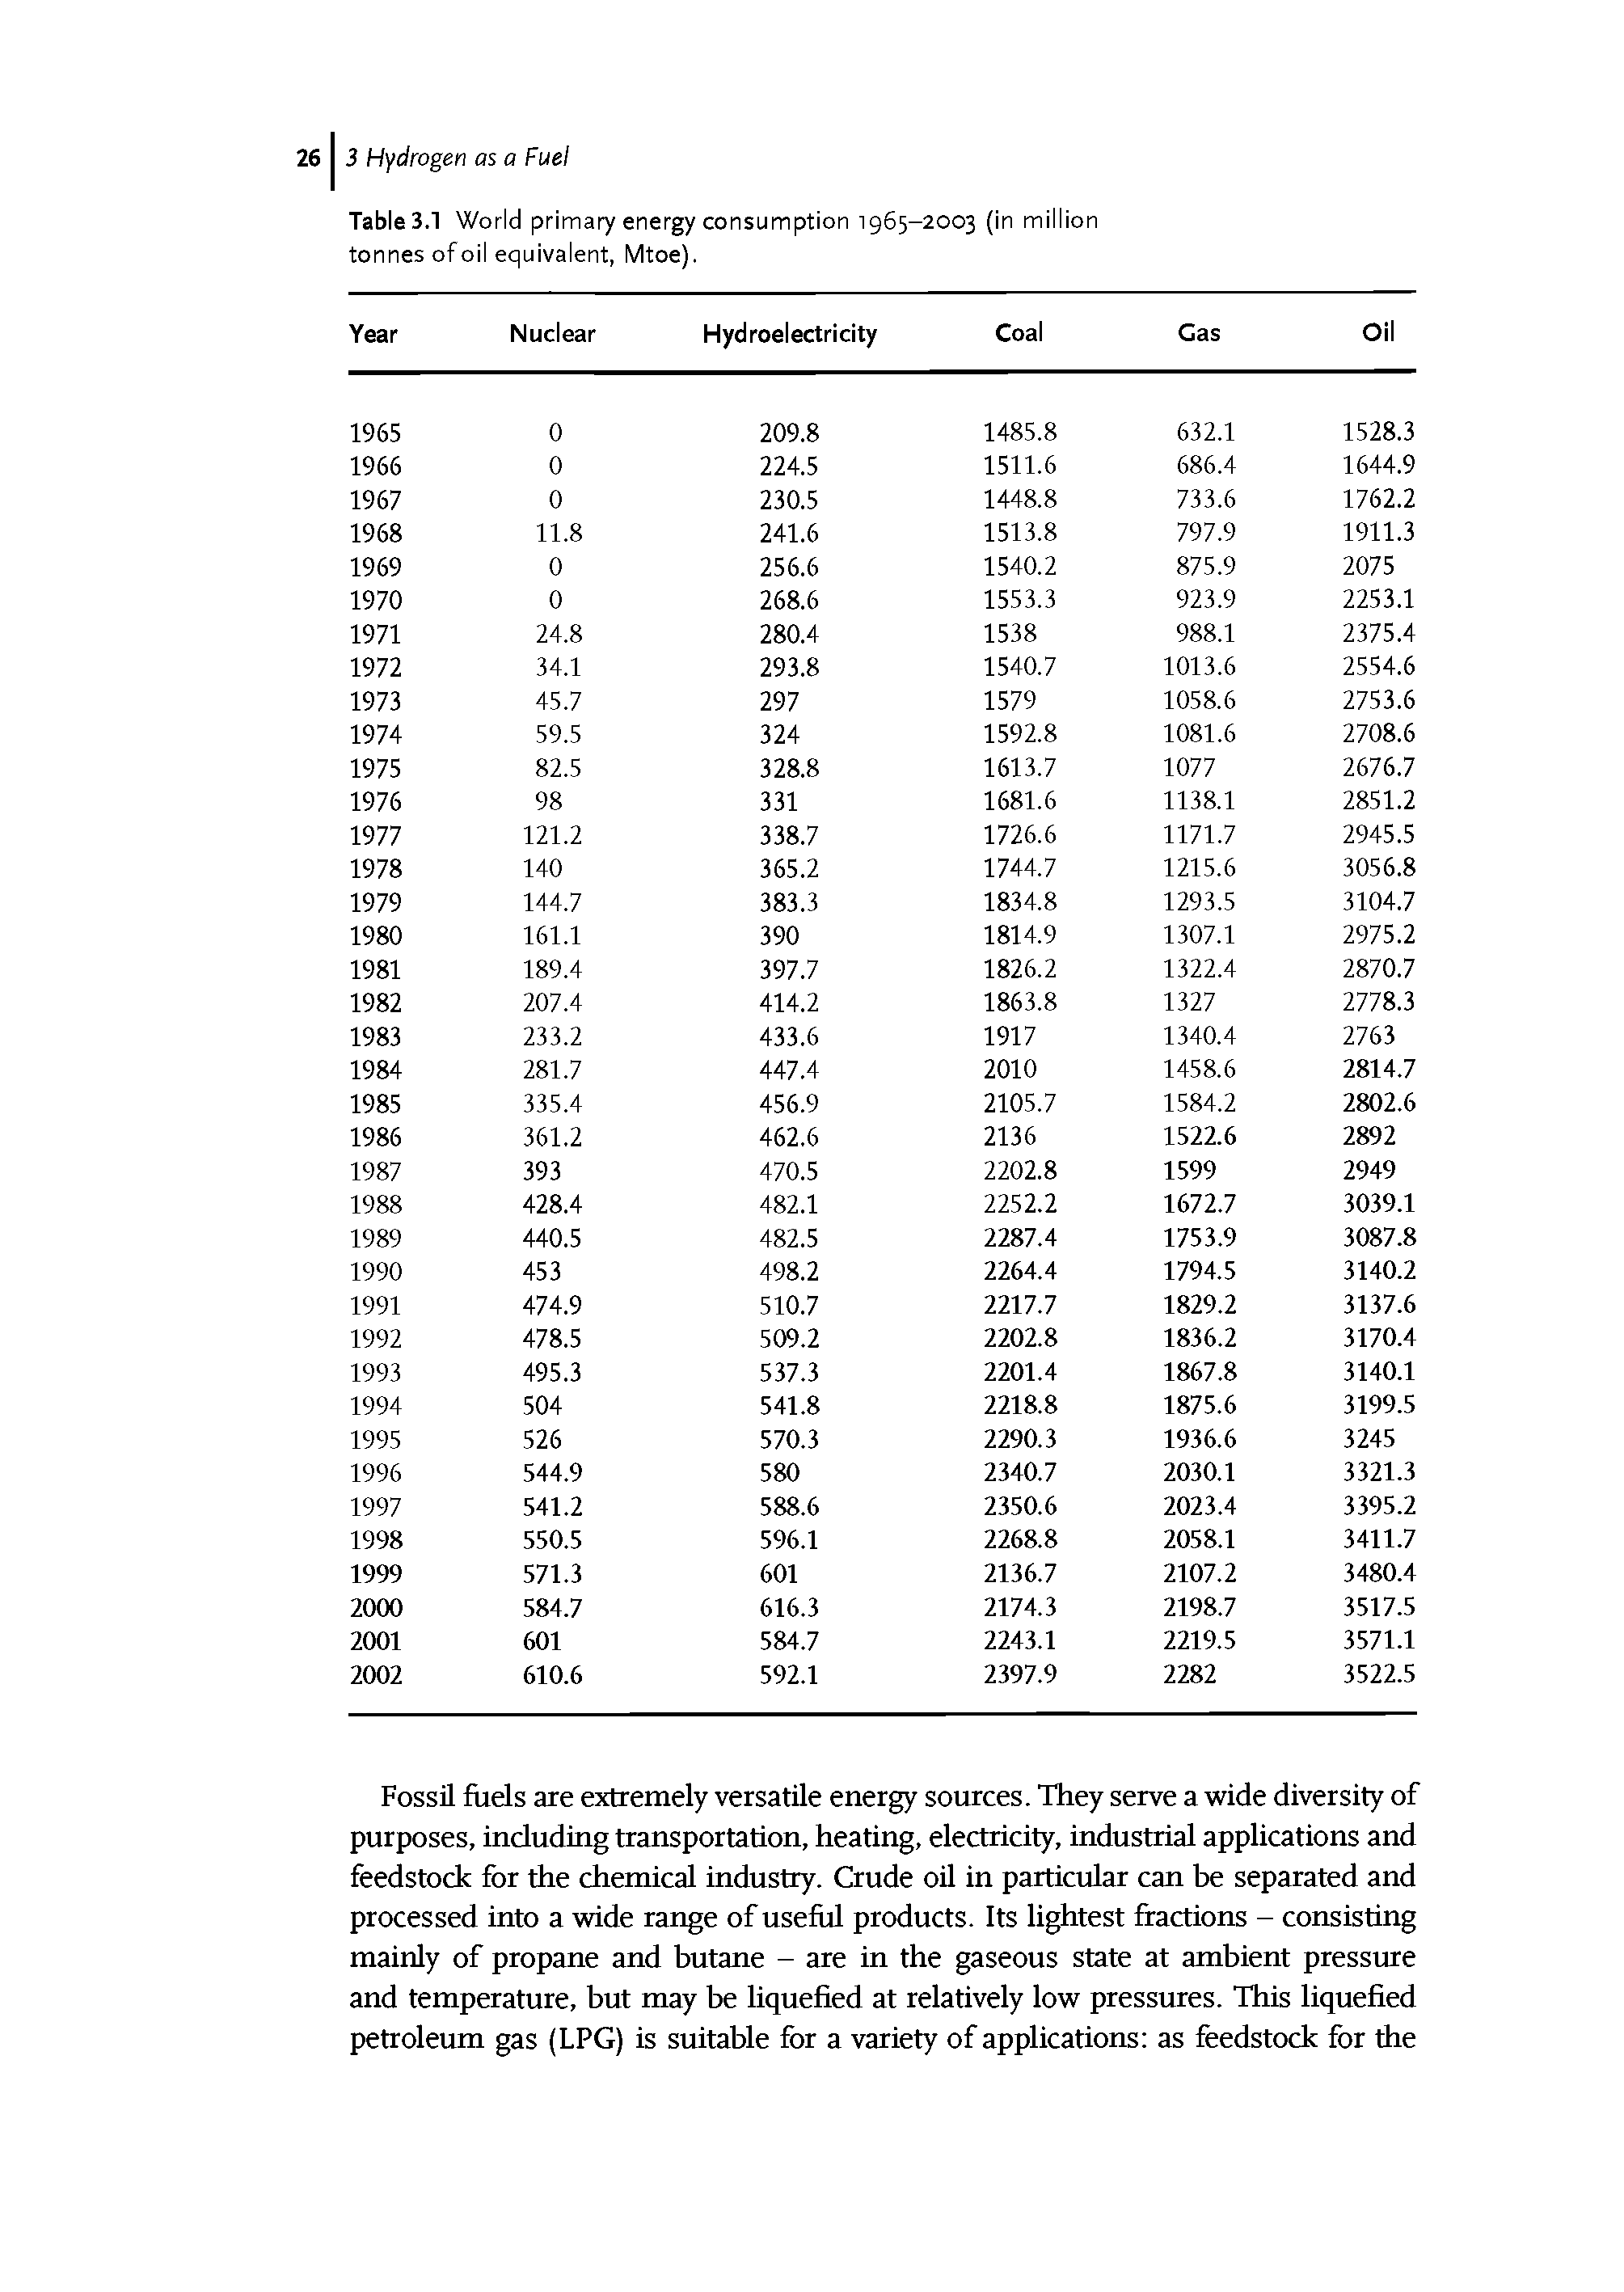 Tables. World primary energy consumption 1965-2003 (in million tonnes of oil equivalent, Mtoe).